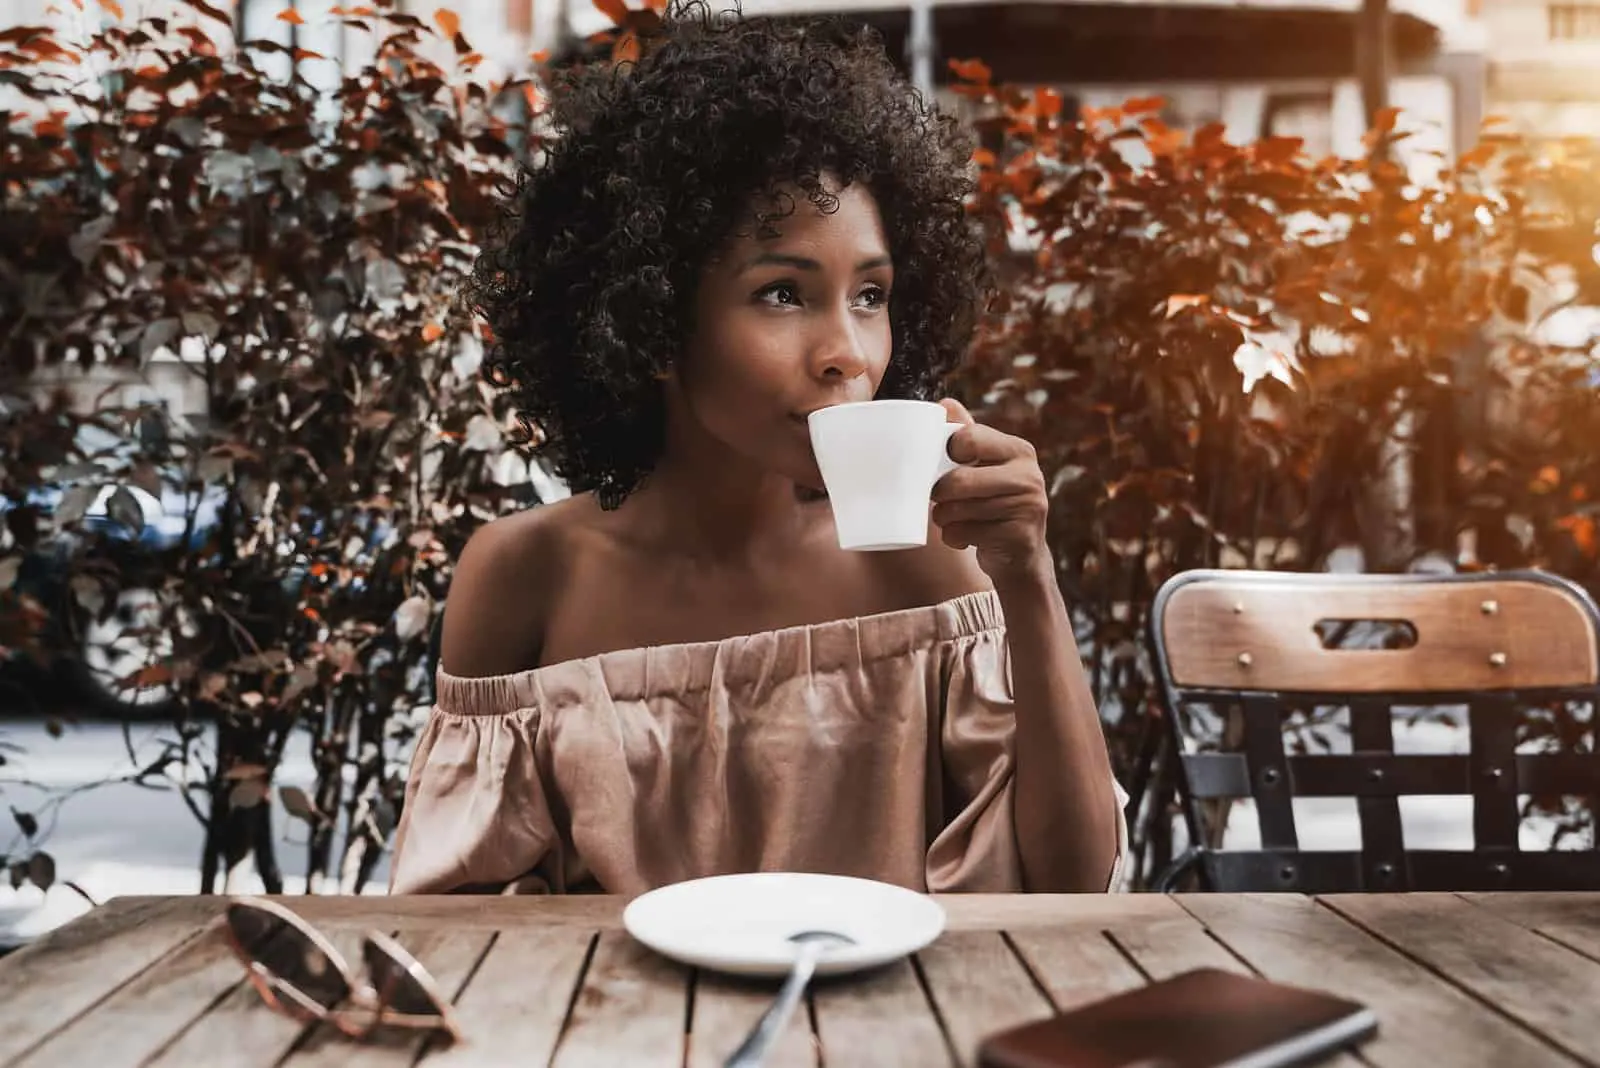 a woman with frizzy hair sits at a table drinking coffee and looks away